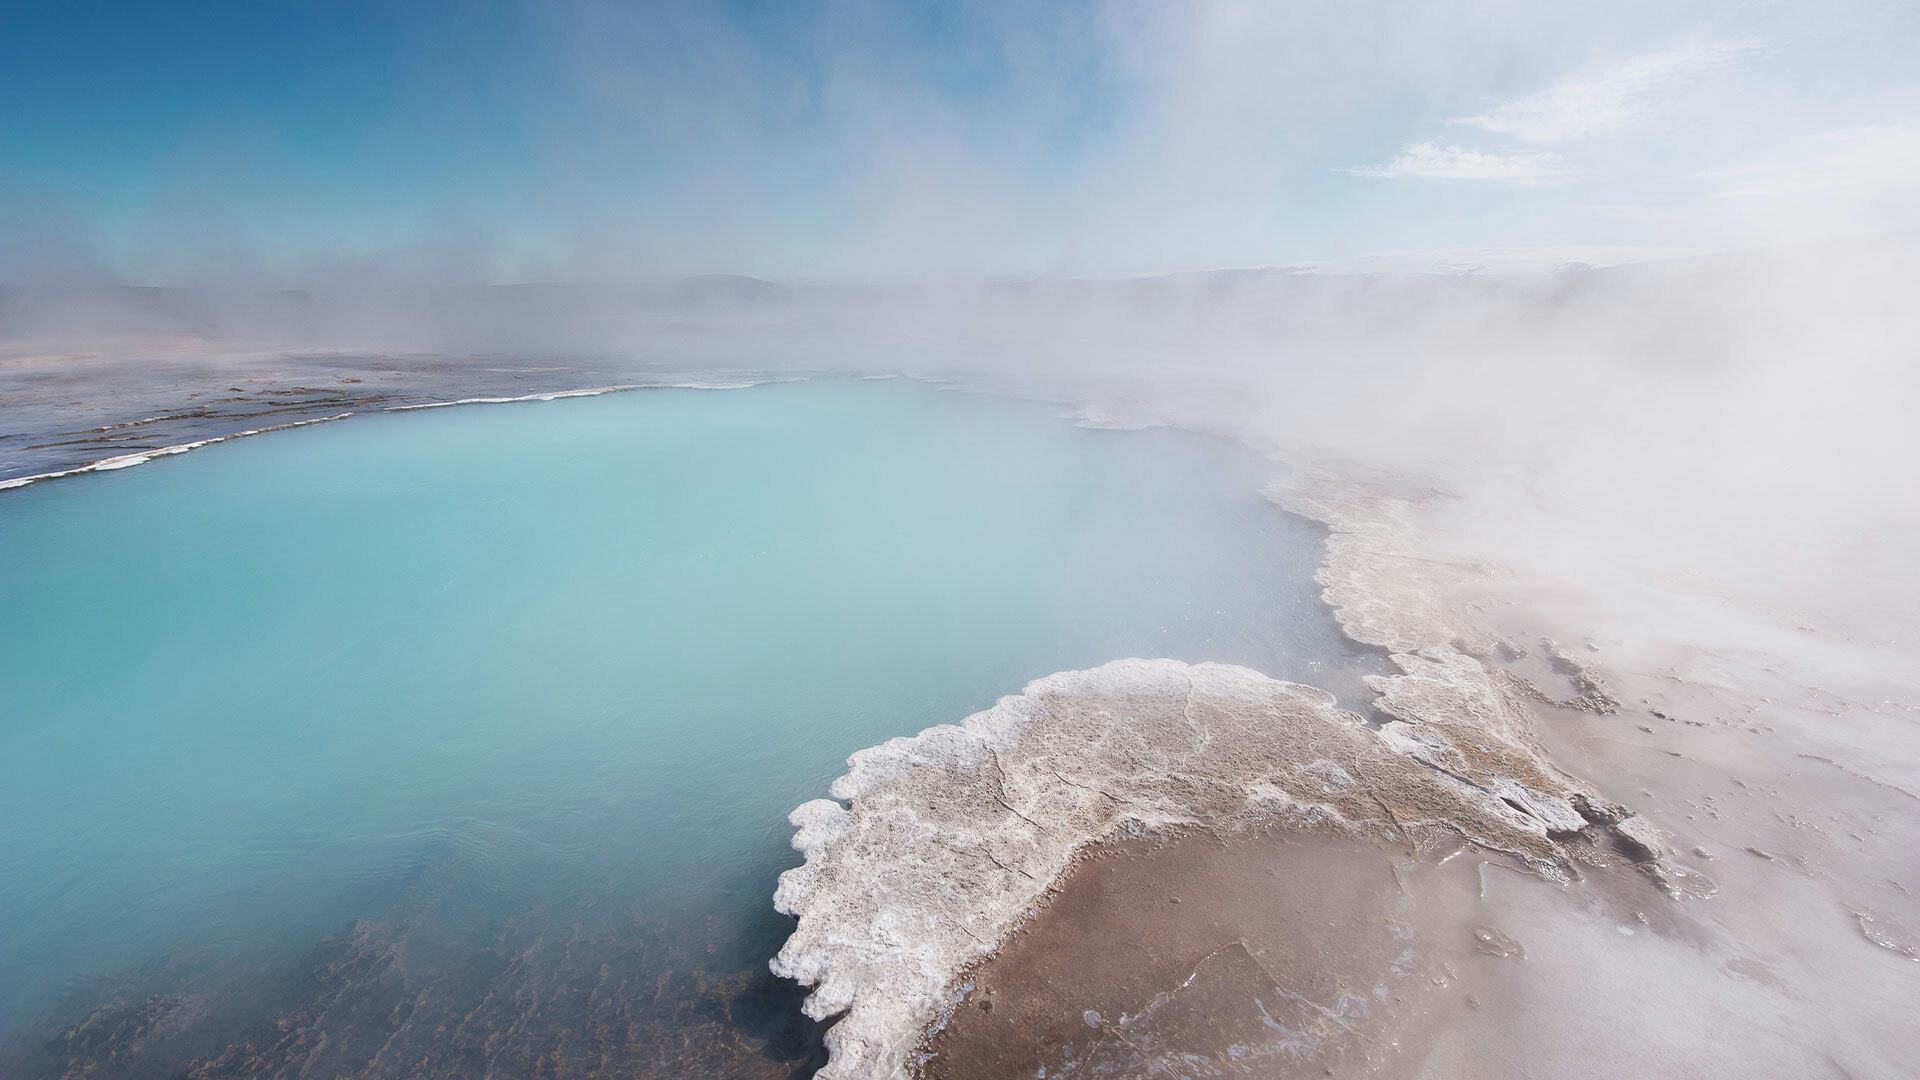 Geothermal water with milky blue shade